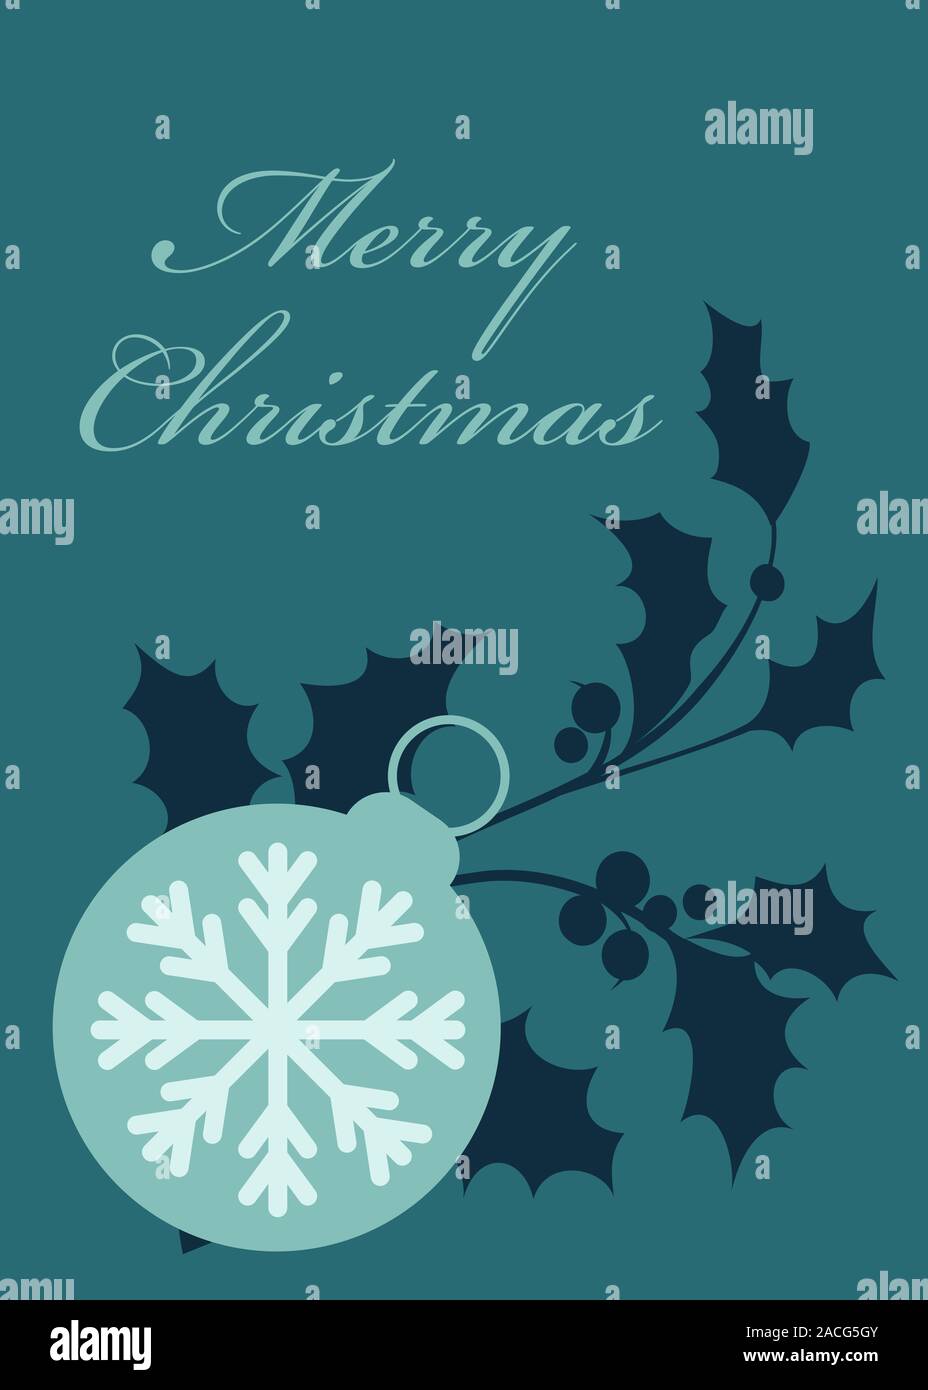 Merry Christmas Illustration Teal and Blue Stock Photo